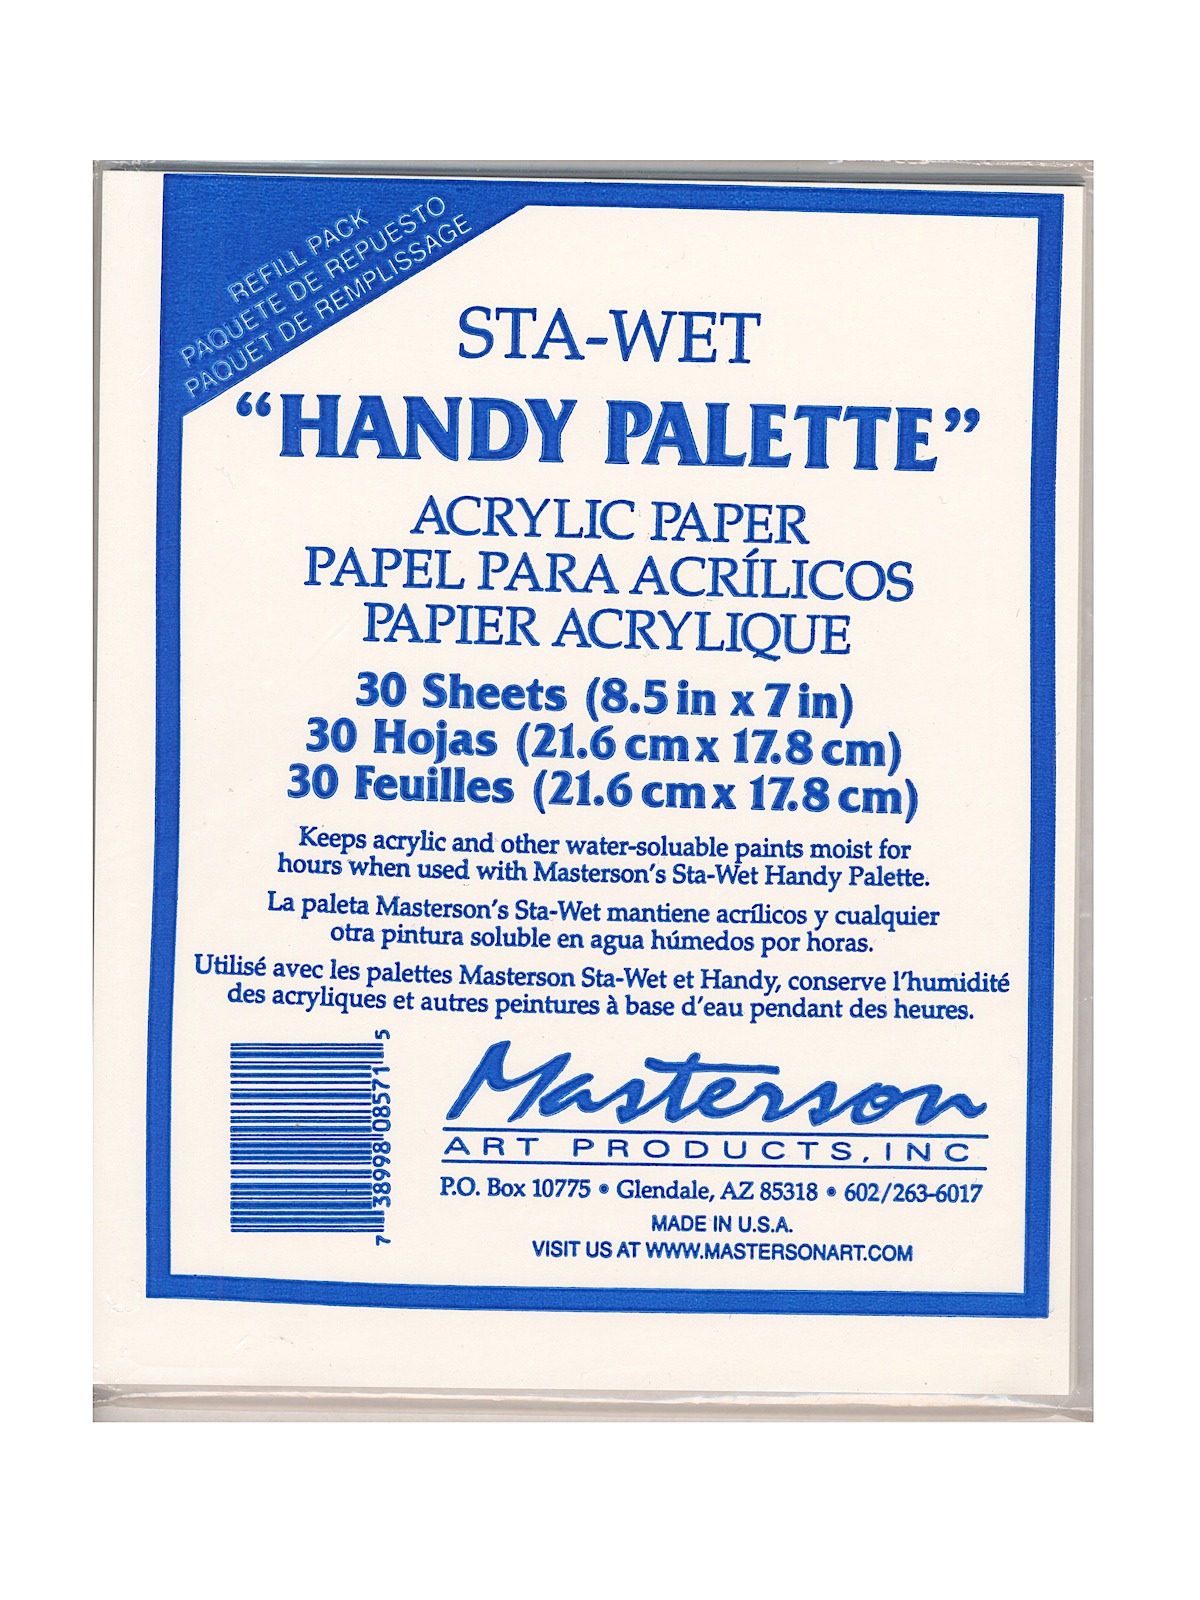 Sta-wet Handy Palette Pack Of 30 Handy Palette Acrylic Paper 8 1 2 In. X 7 In.